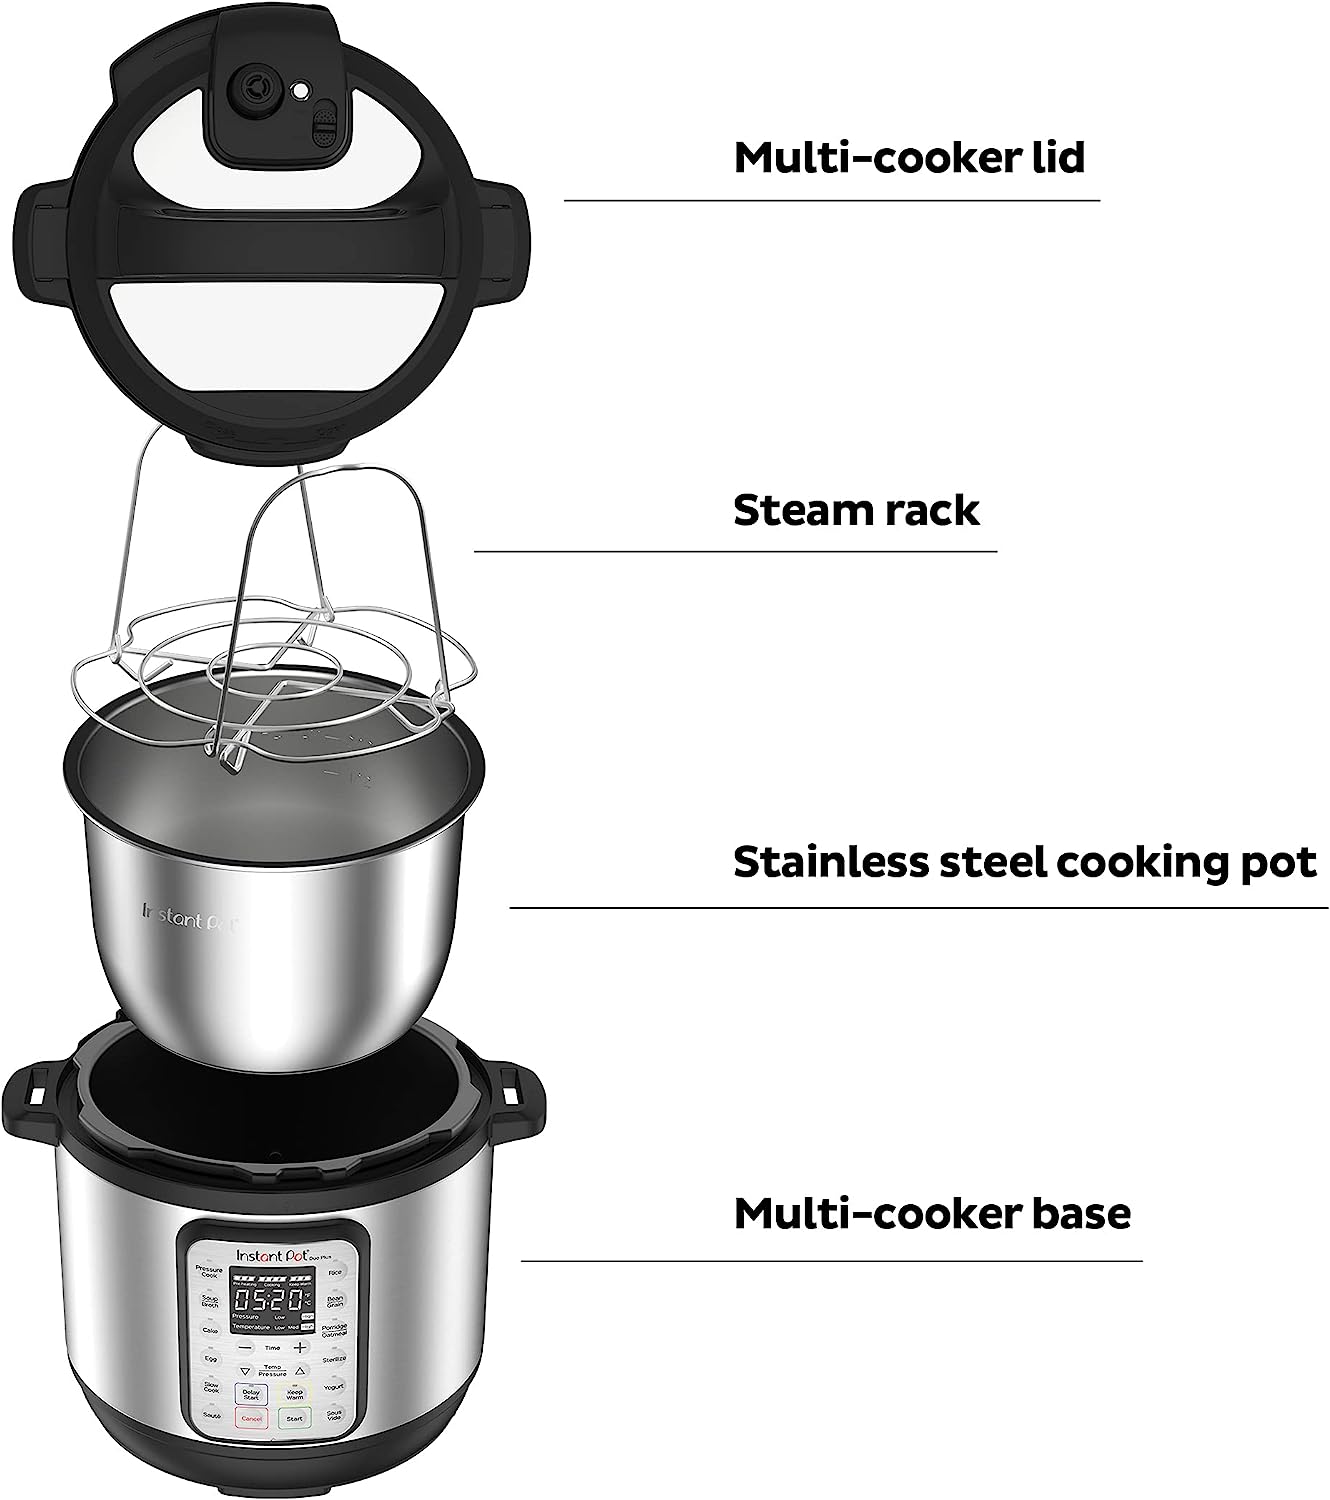 https://bigbigmart.com/wp-content/uploads/2023/06/Instant-Pot-Duo-Plus-9-in-1-Electric-Pressure-Cooker-Slow-Cooker-Rice-Cooker-Steamer-Saute-Yogurt-Maker-Warmer-Sterilizer-Includes-Free-App-with-over-1900-Recipes-Stainless-Steel-8-Quart66.jpg